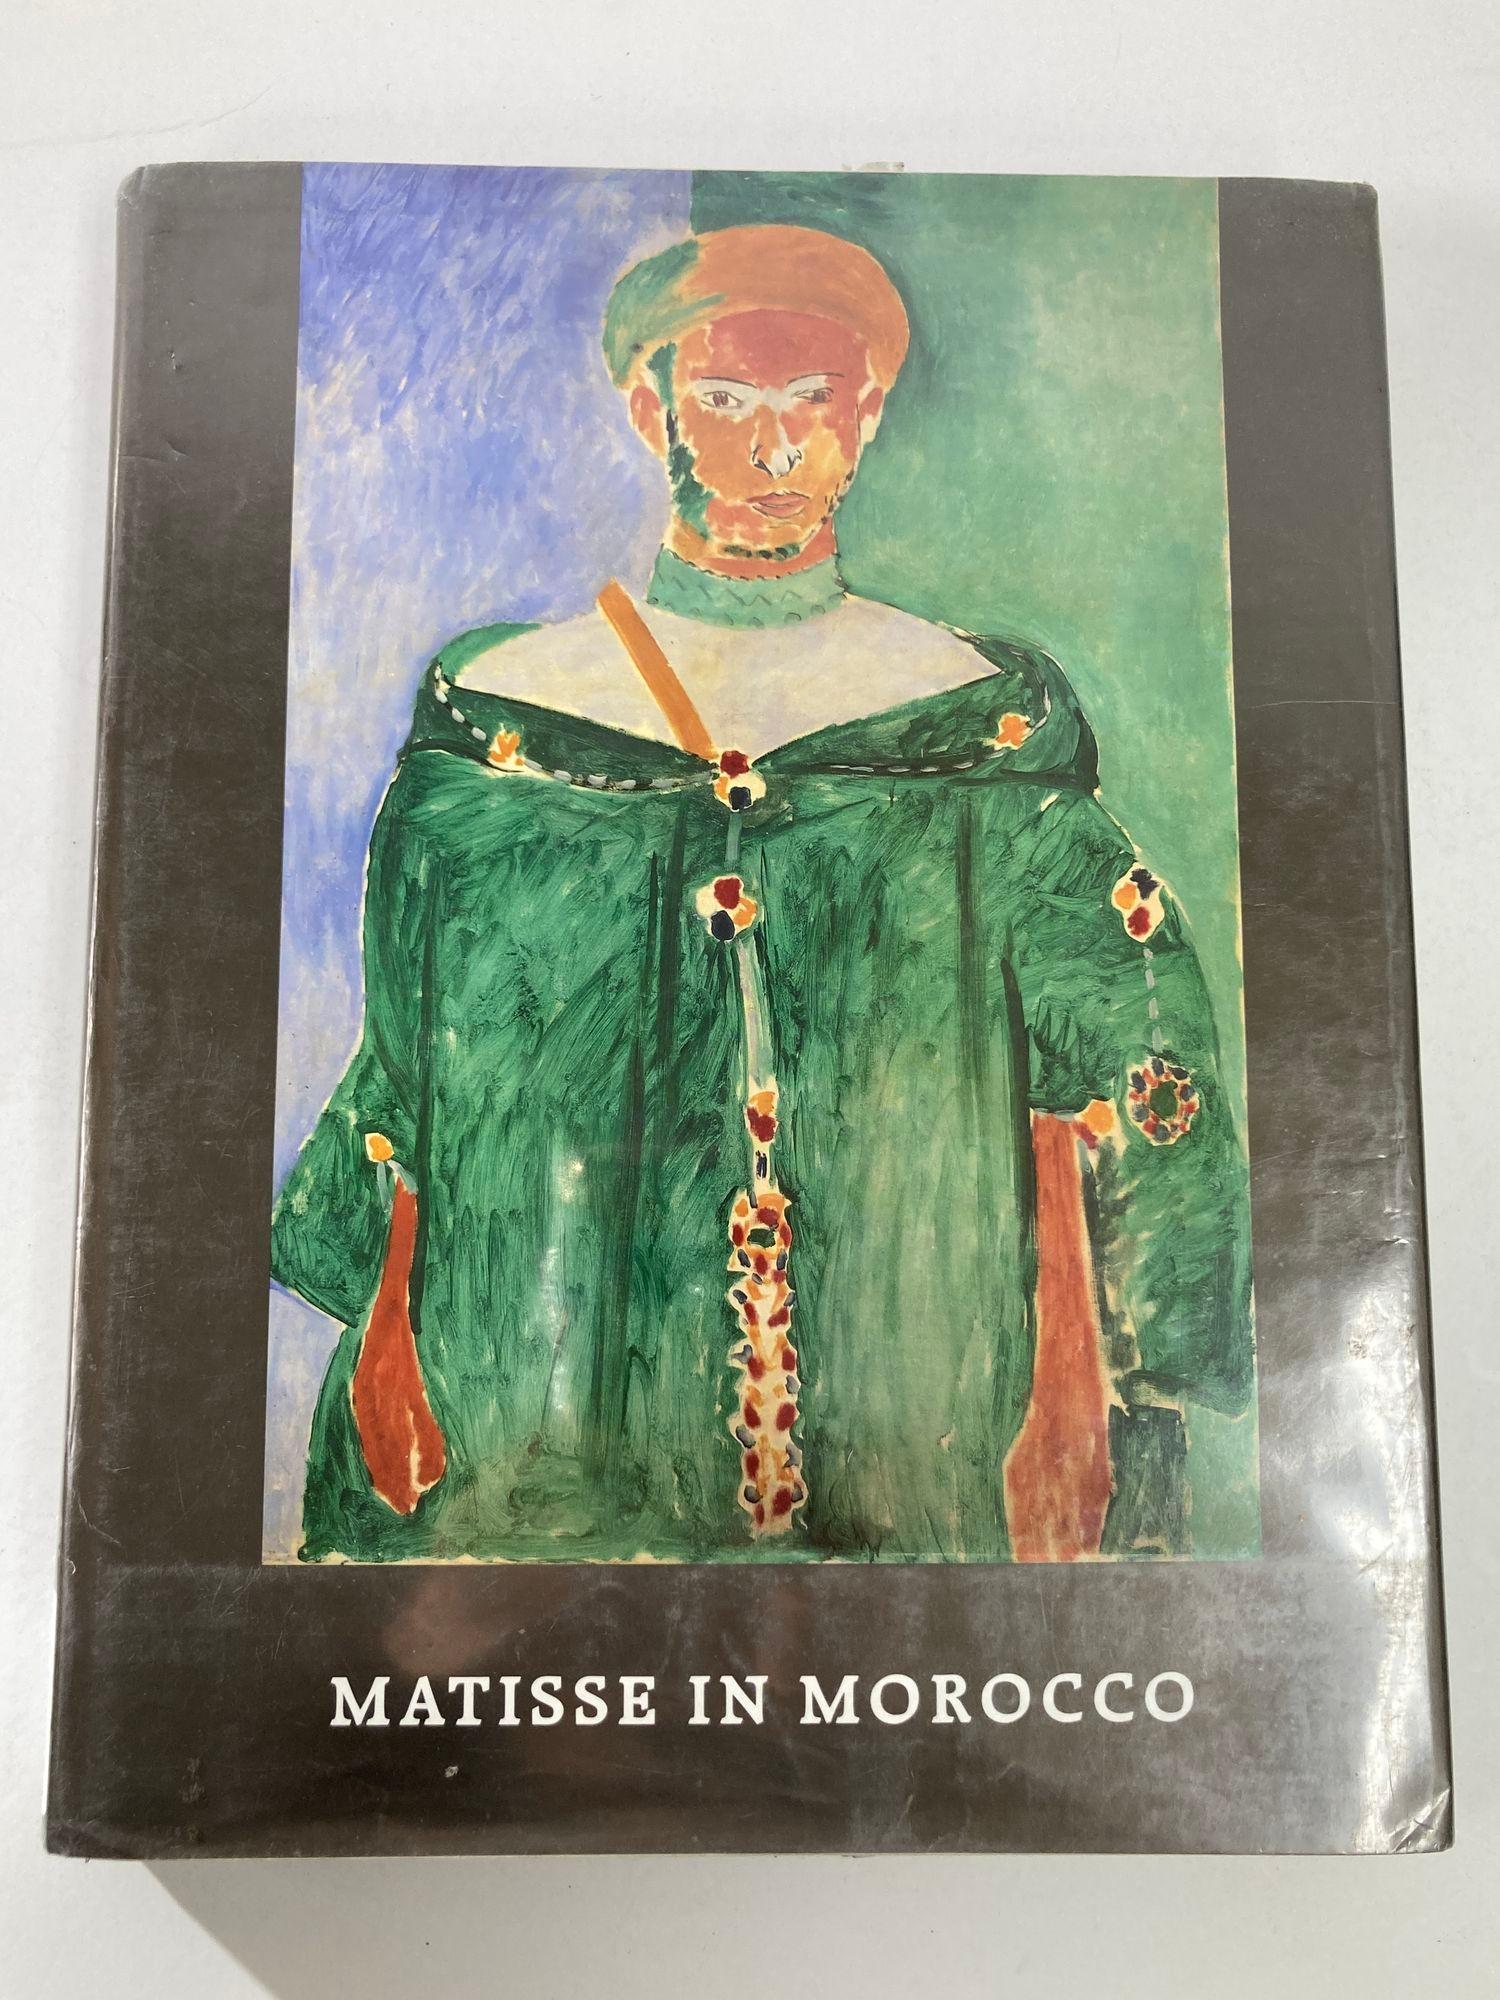 Matisse in Morocco: The Paintings and Drawings, 1912-1913.
Jack Cowart, Pierre Schneider, John Elderfield, Albert Grigor'evich Kostenevich, Marina Bessanova
National Gallery of Art, 1990 - Drawing, French Painter and Sculptor.
Publisher ‏ :